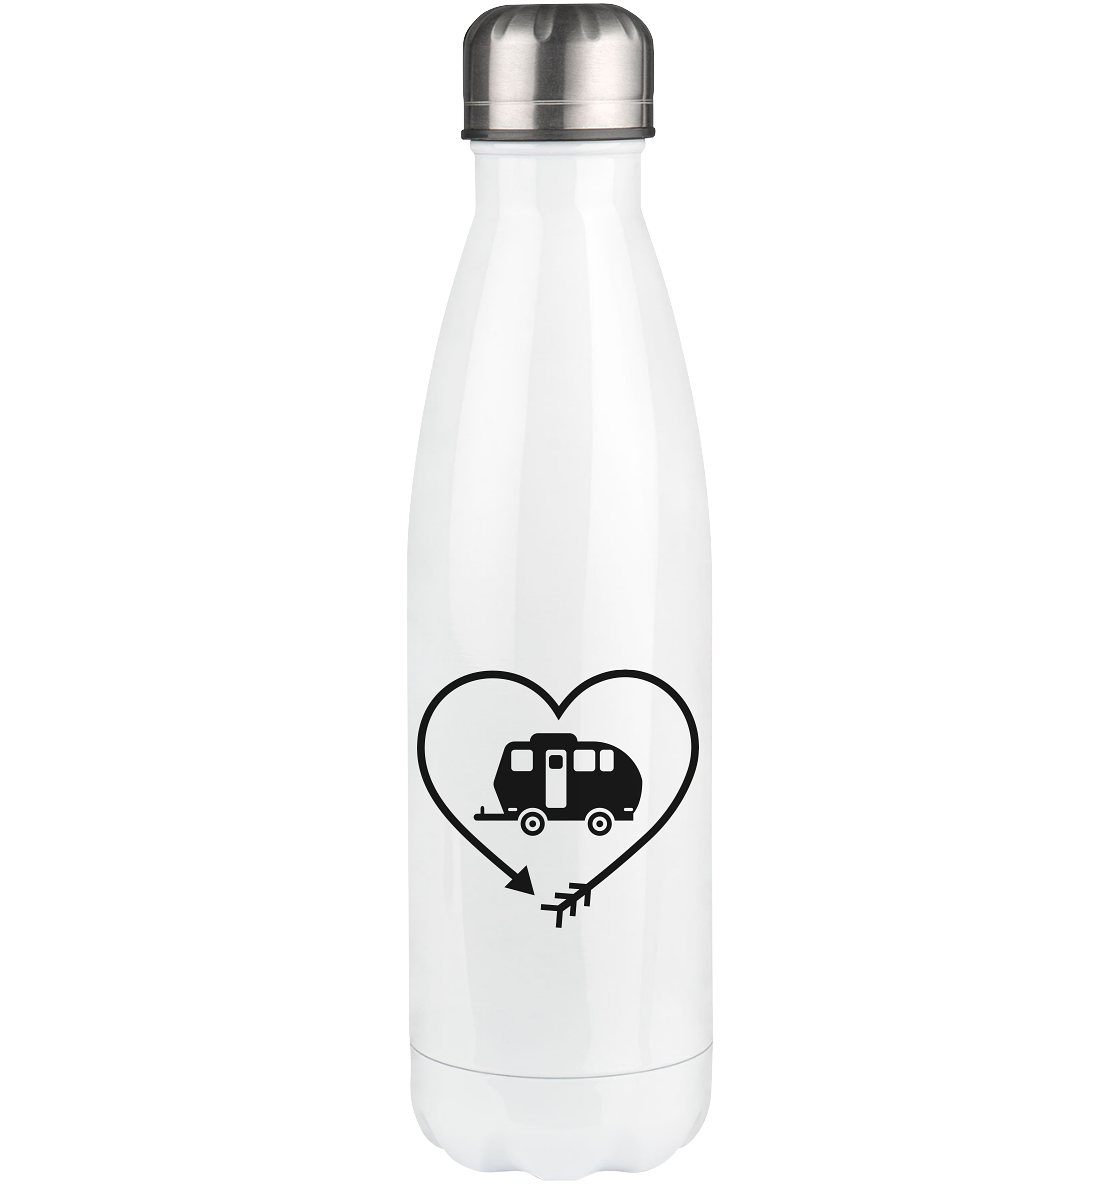 Arrow in Heartshape and Camping 2 - Edelstahl Thermosflasche camping UONP 500ml